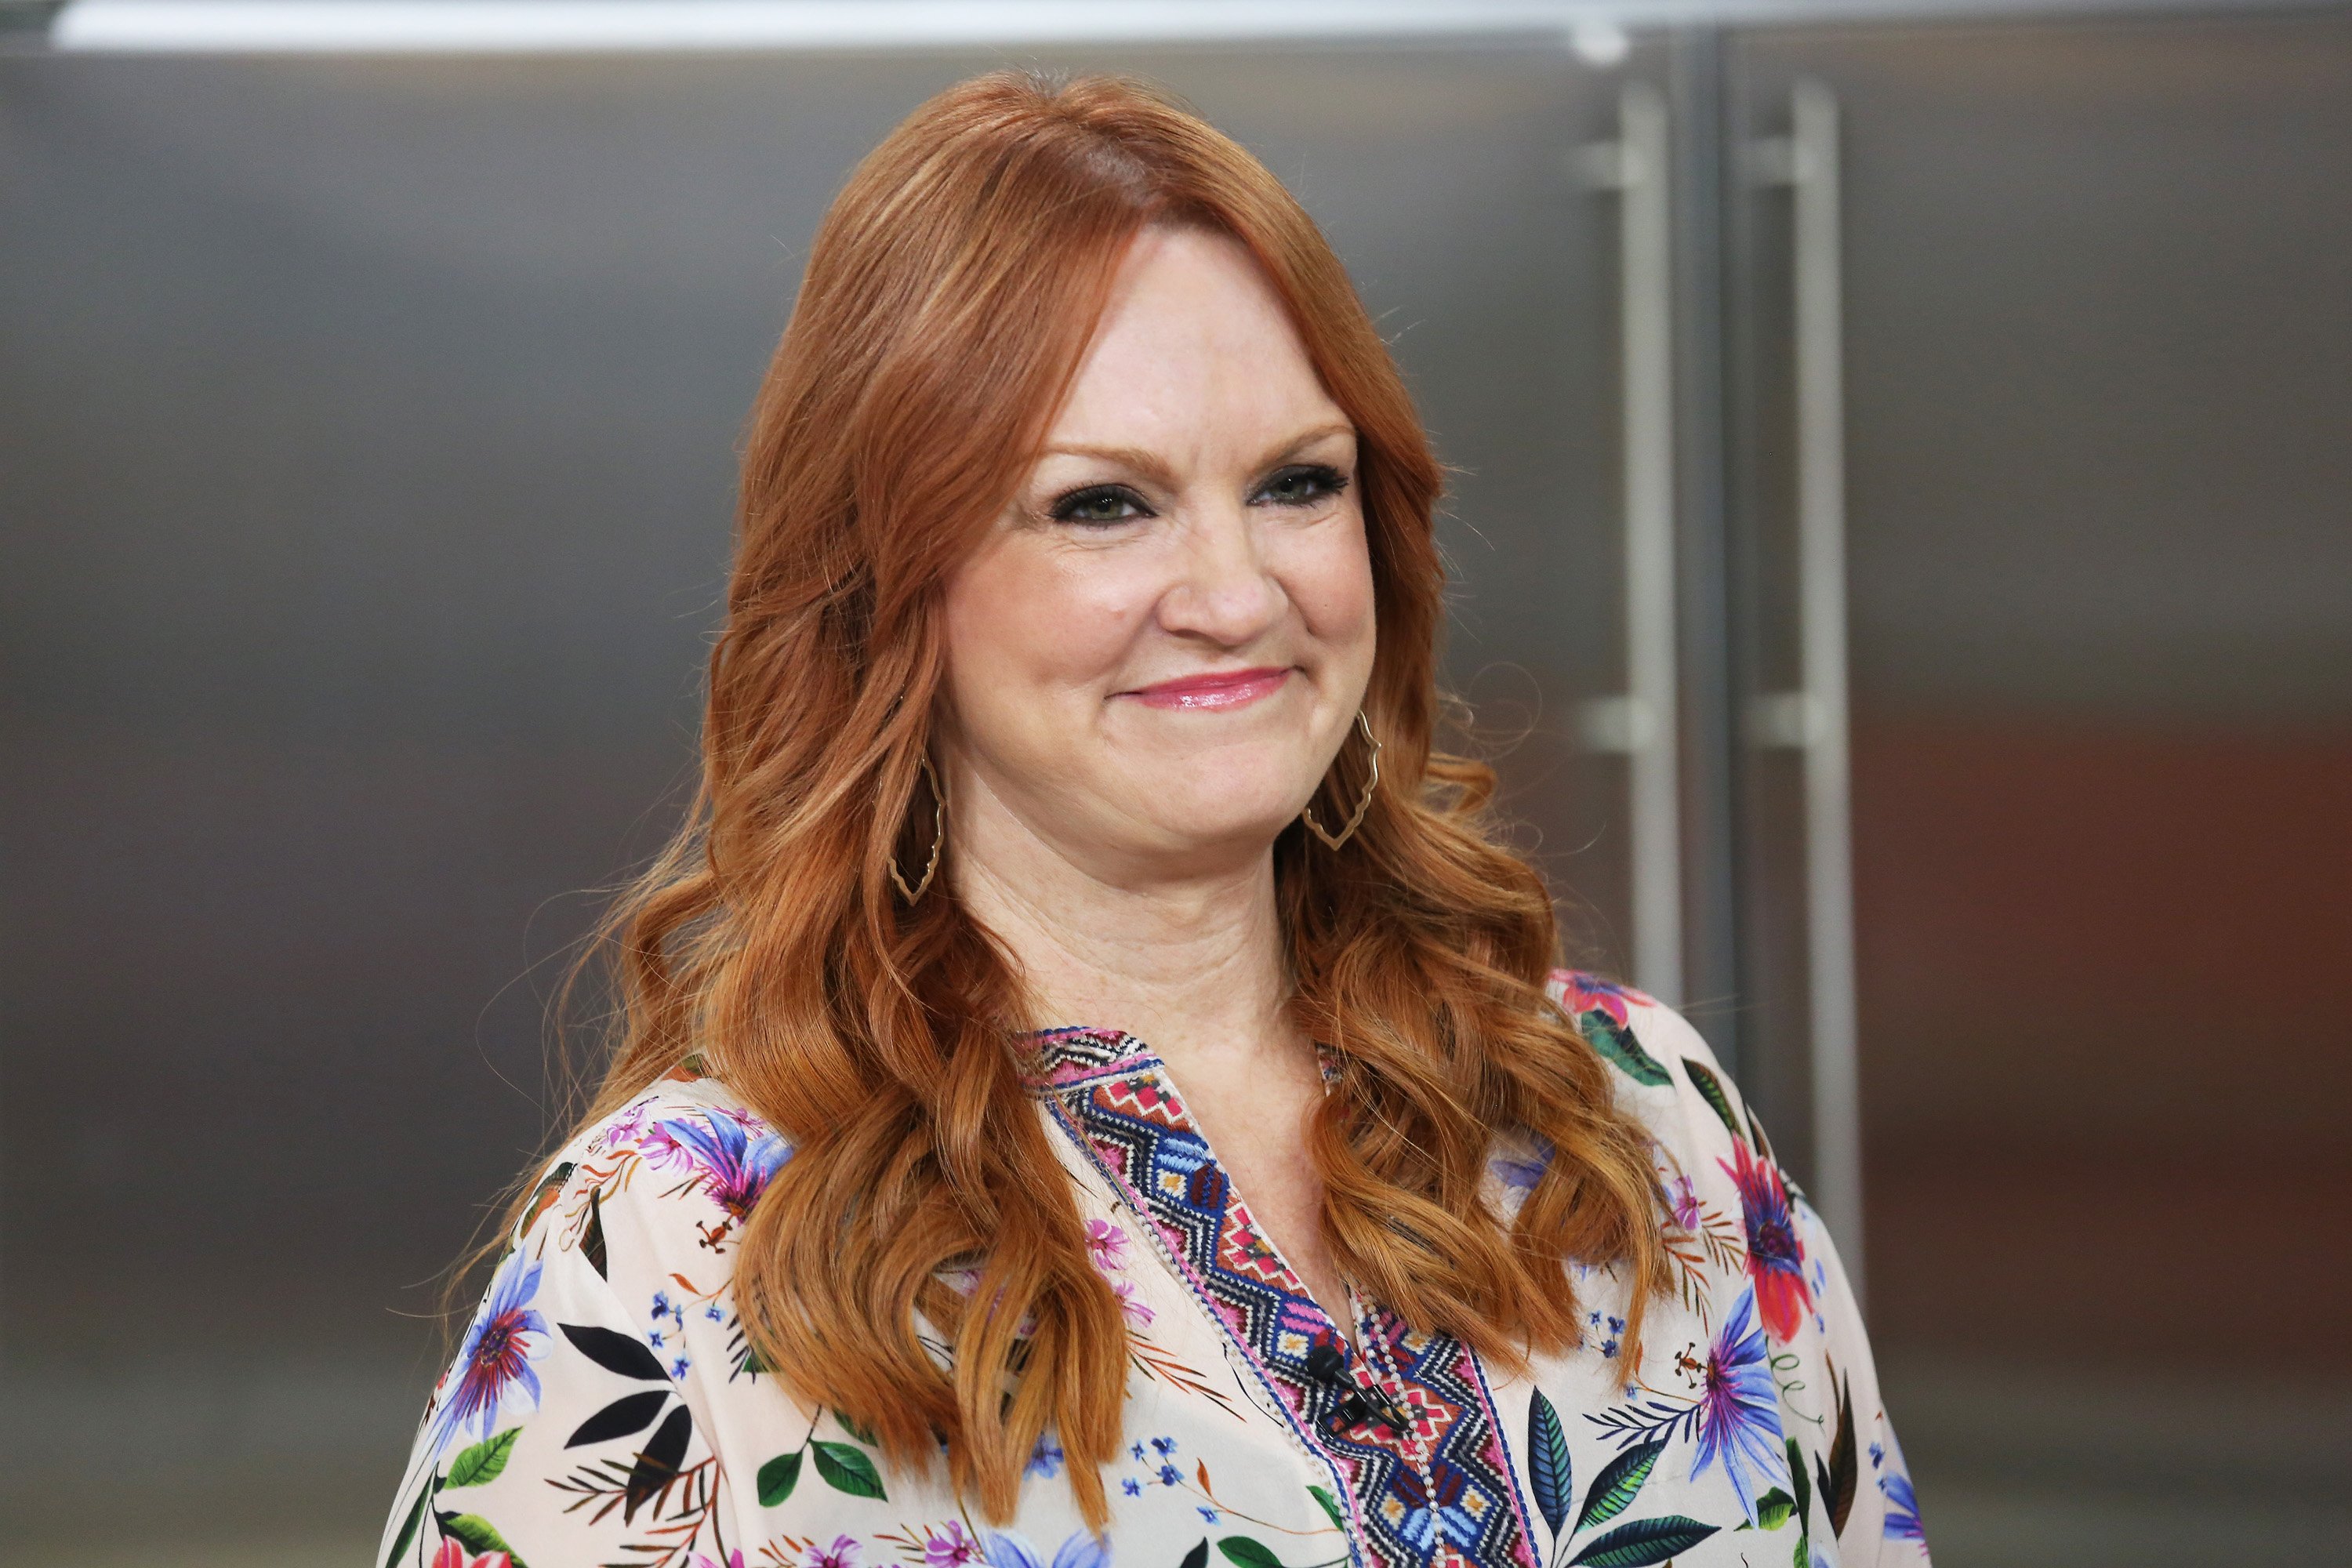 Ree Drummond on the 'Today' show